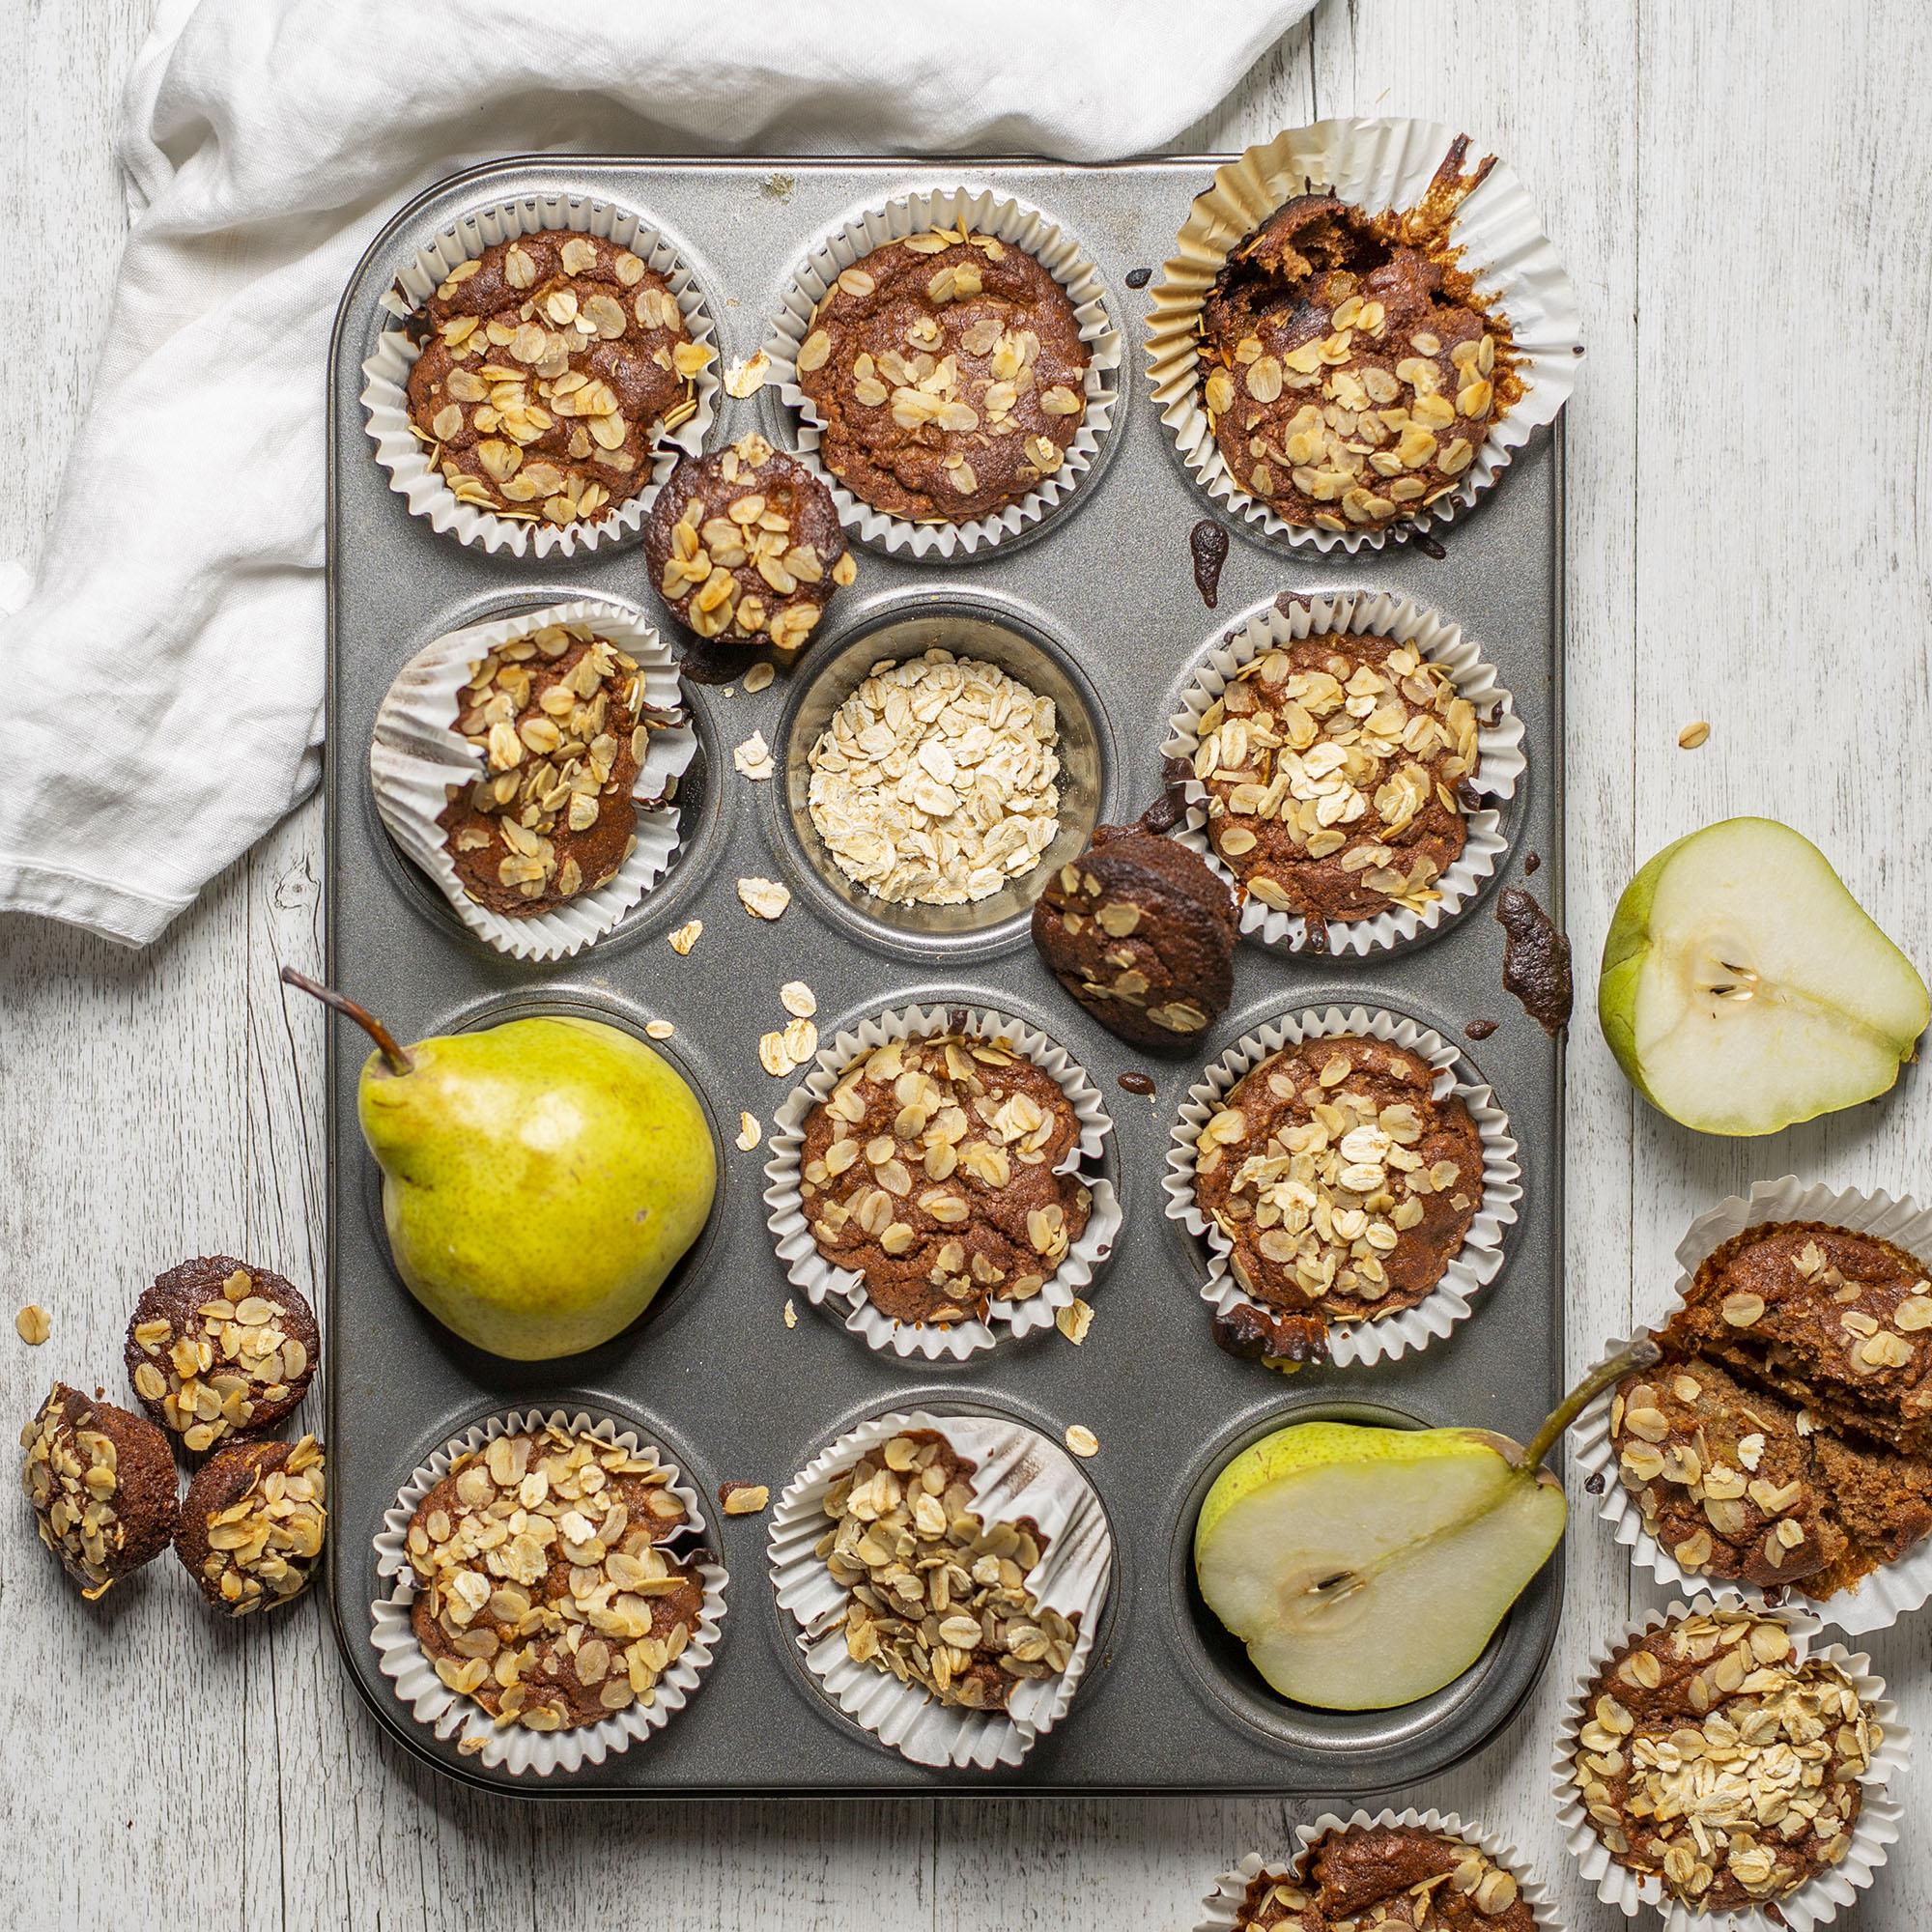 Spiced Pear Muffins